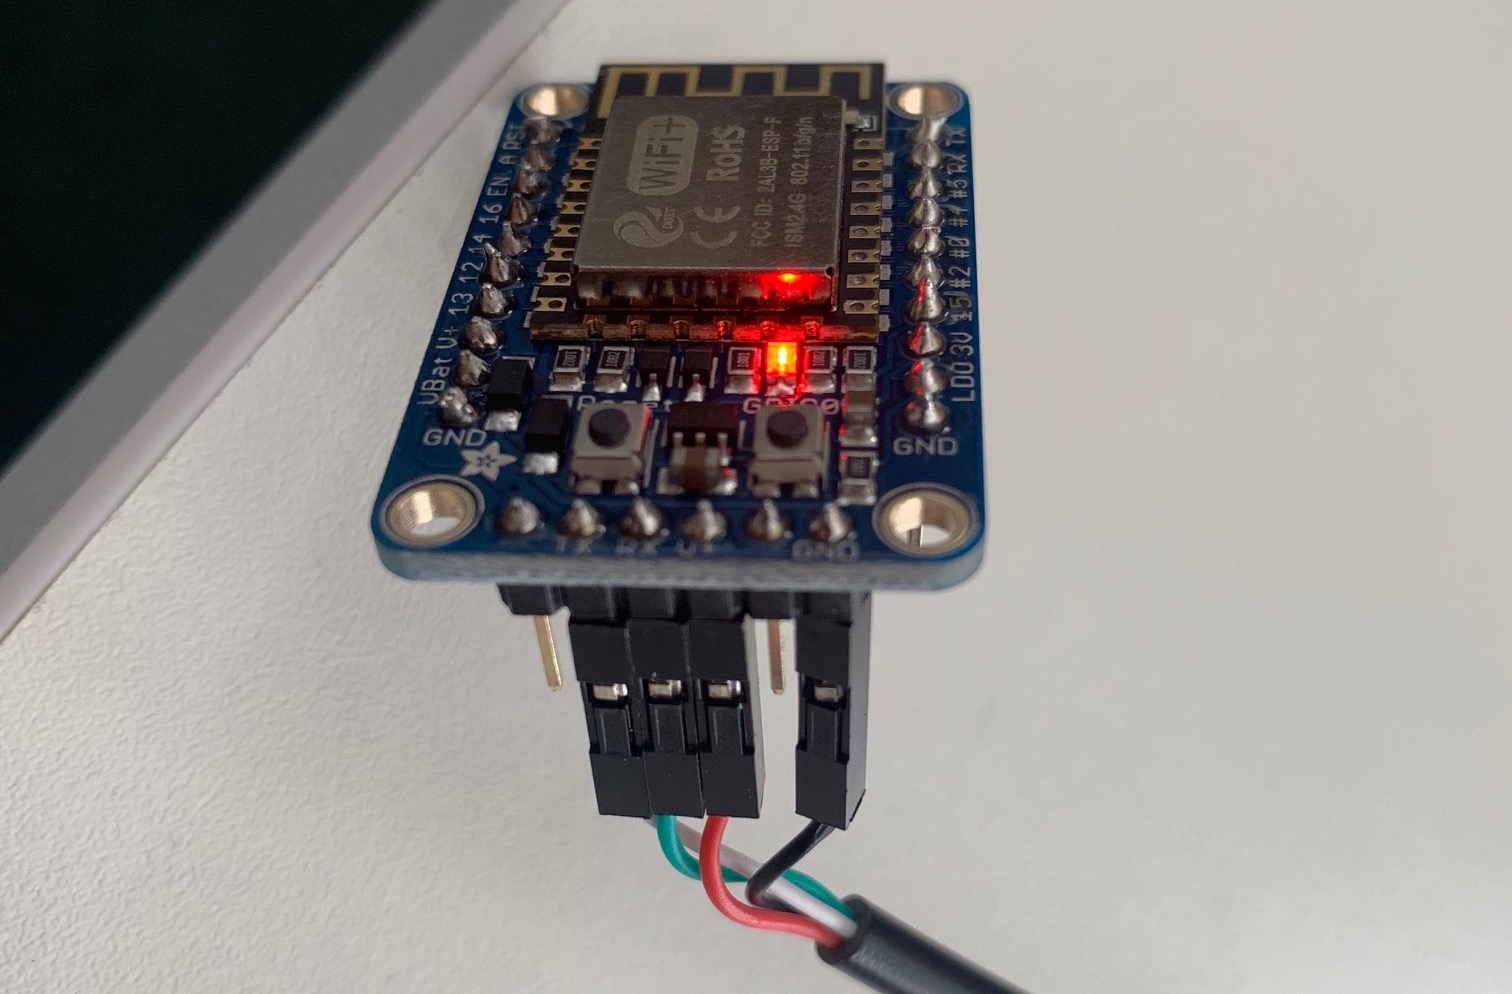 Image showing the pins on the Adafruit Huzzah ESP8266 Breakout connecting to white, green, red and black sockets on the Adafruit Huzzah ESP8266 Breakout (check table below)